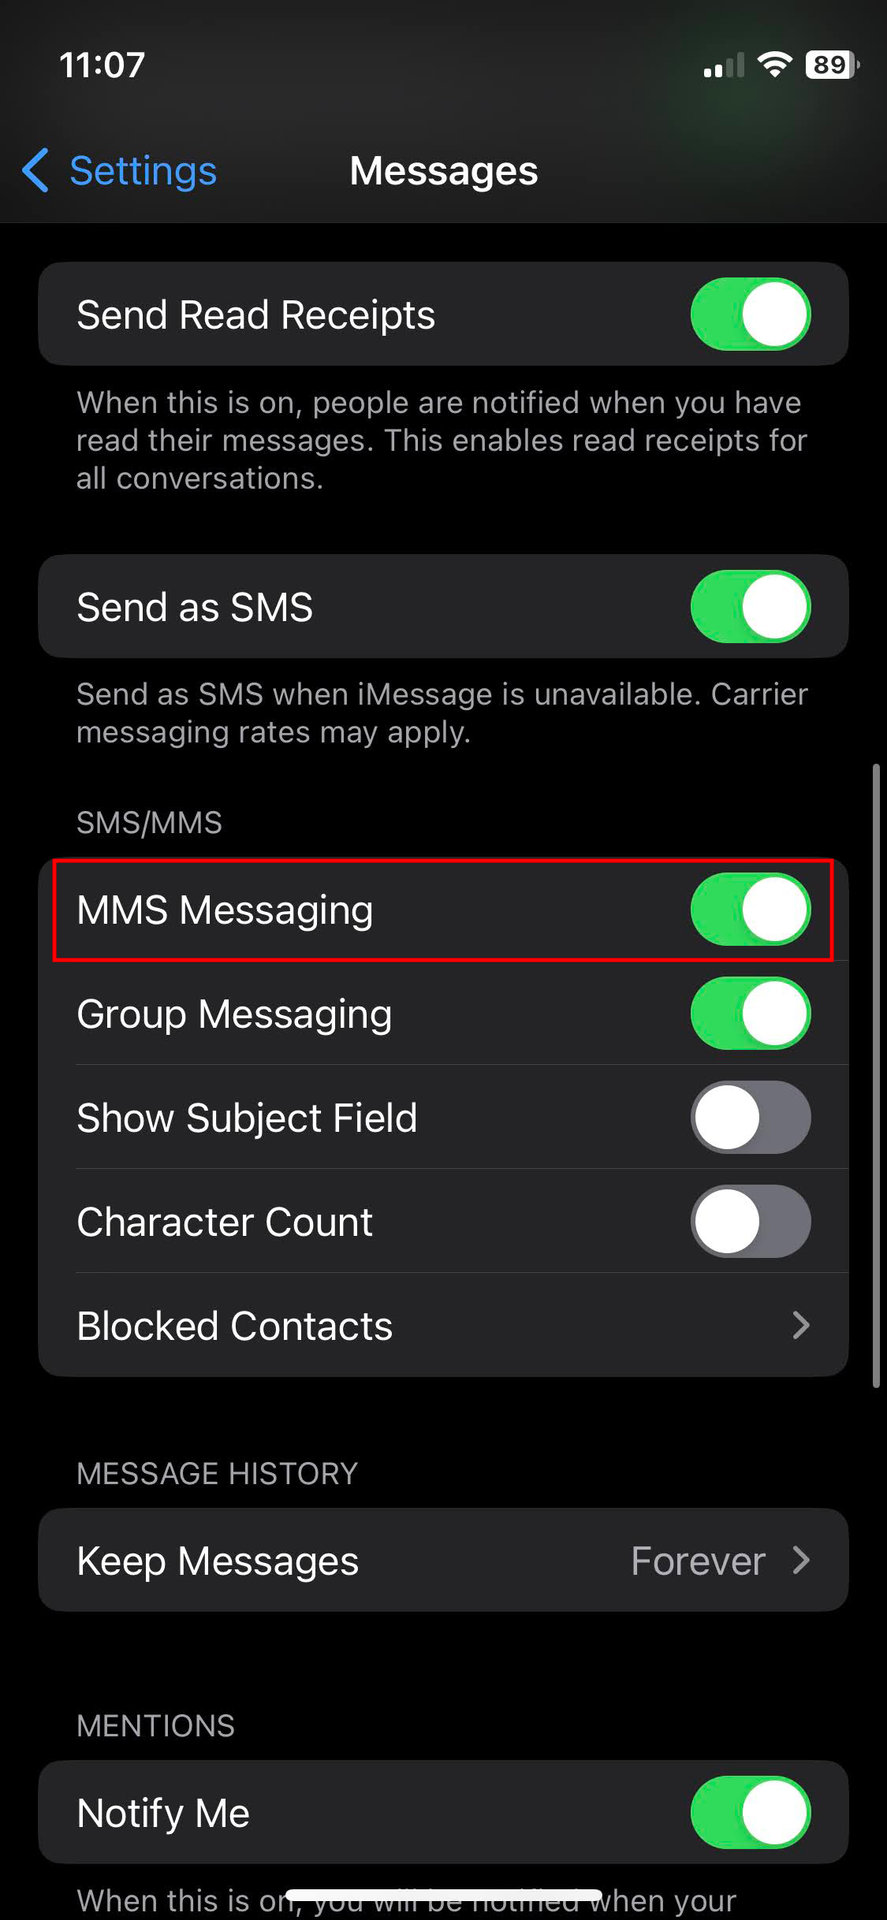 How to check if MMS Messaging on iPhone is turned on 2